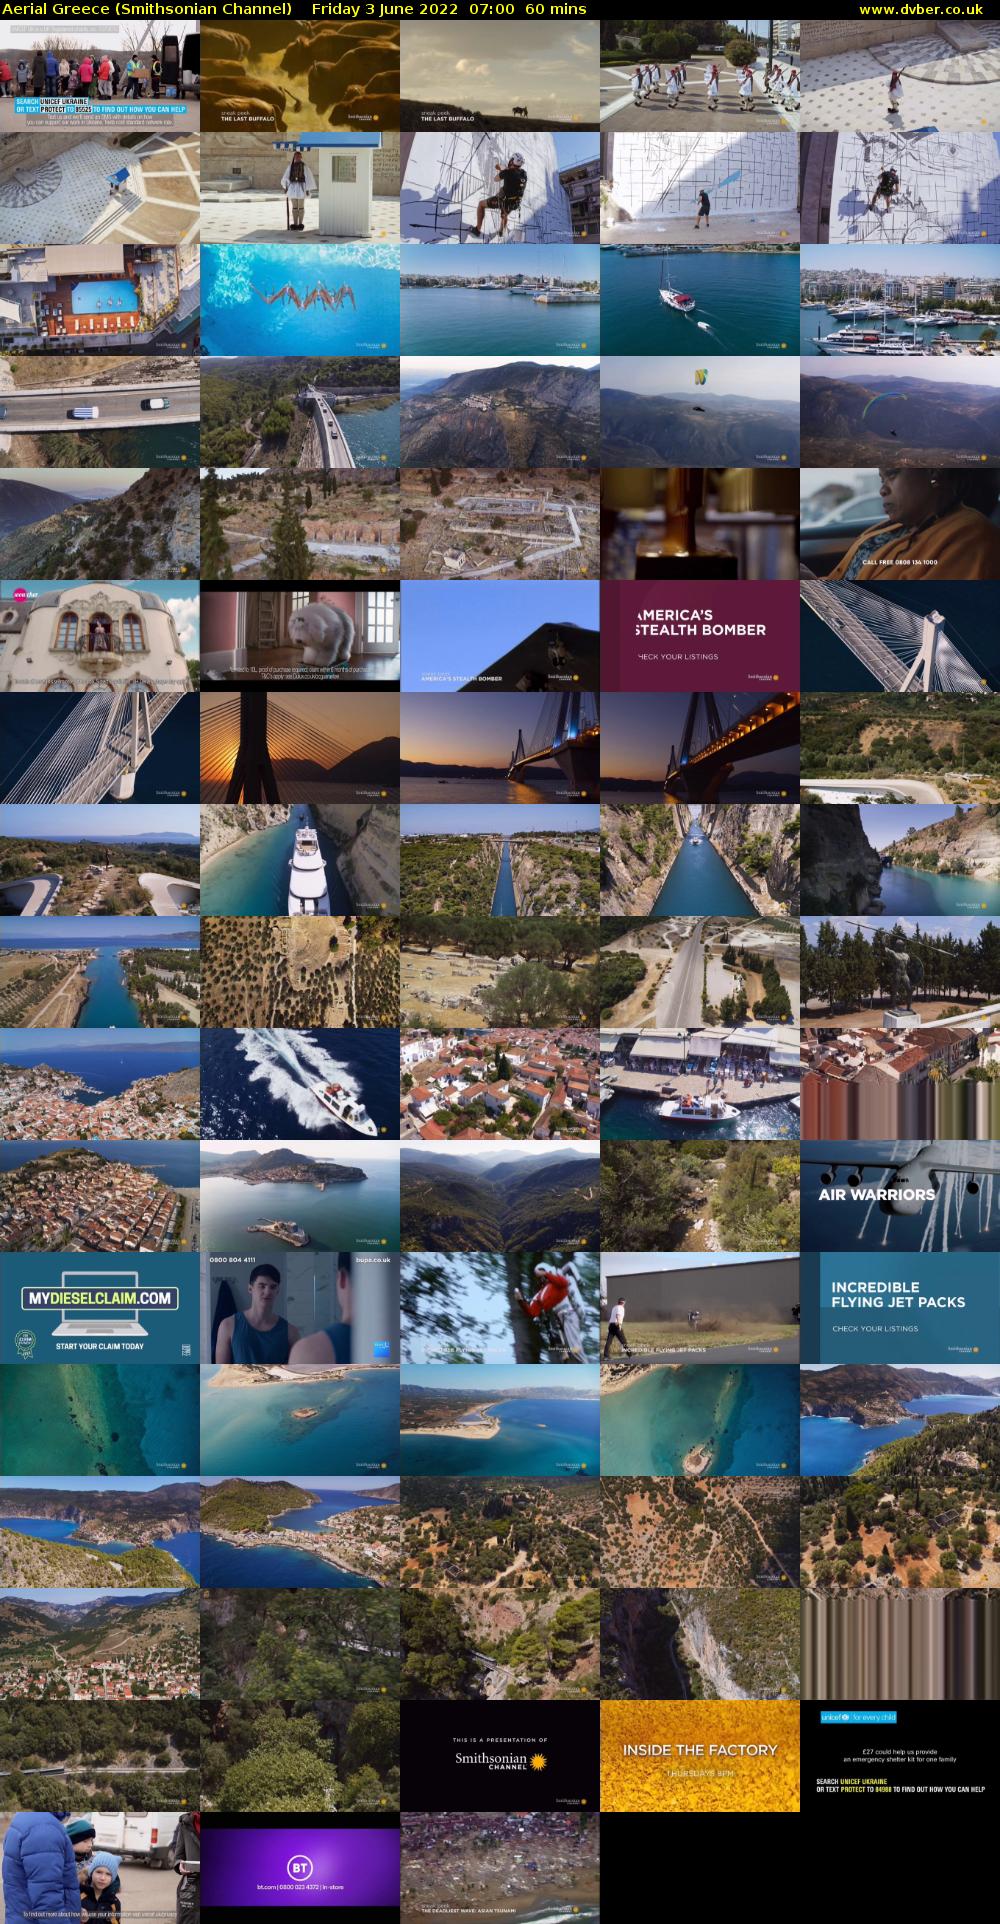 Aerial Greece (Smithsonian Channel) Friday 3 June 2022 07:00 - 08:00